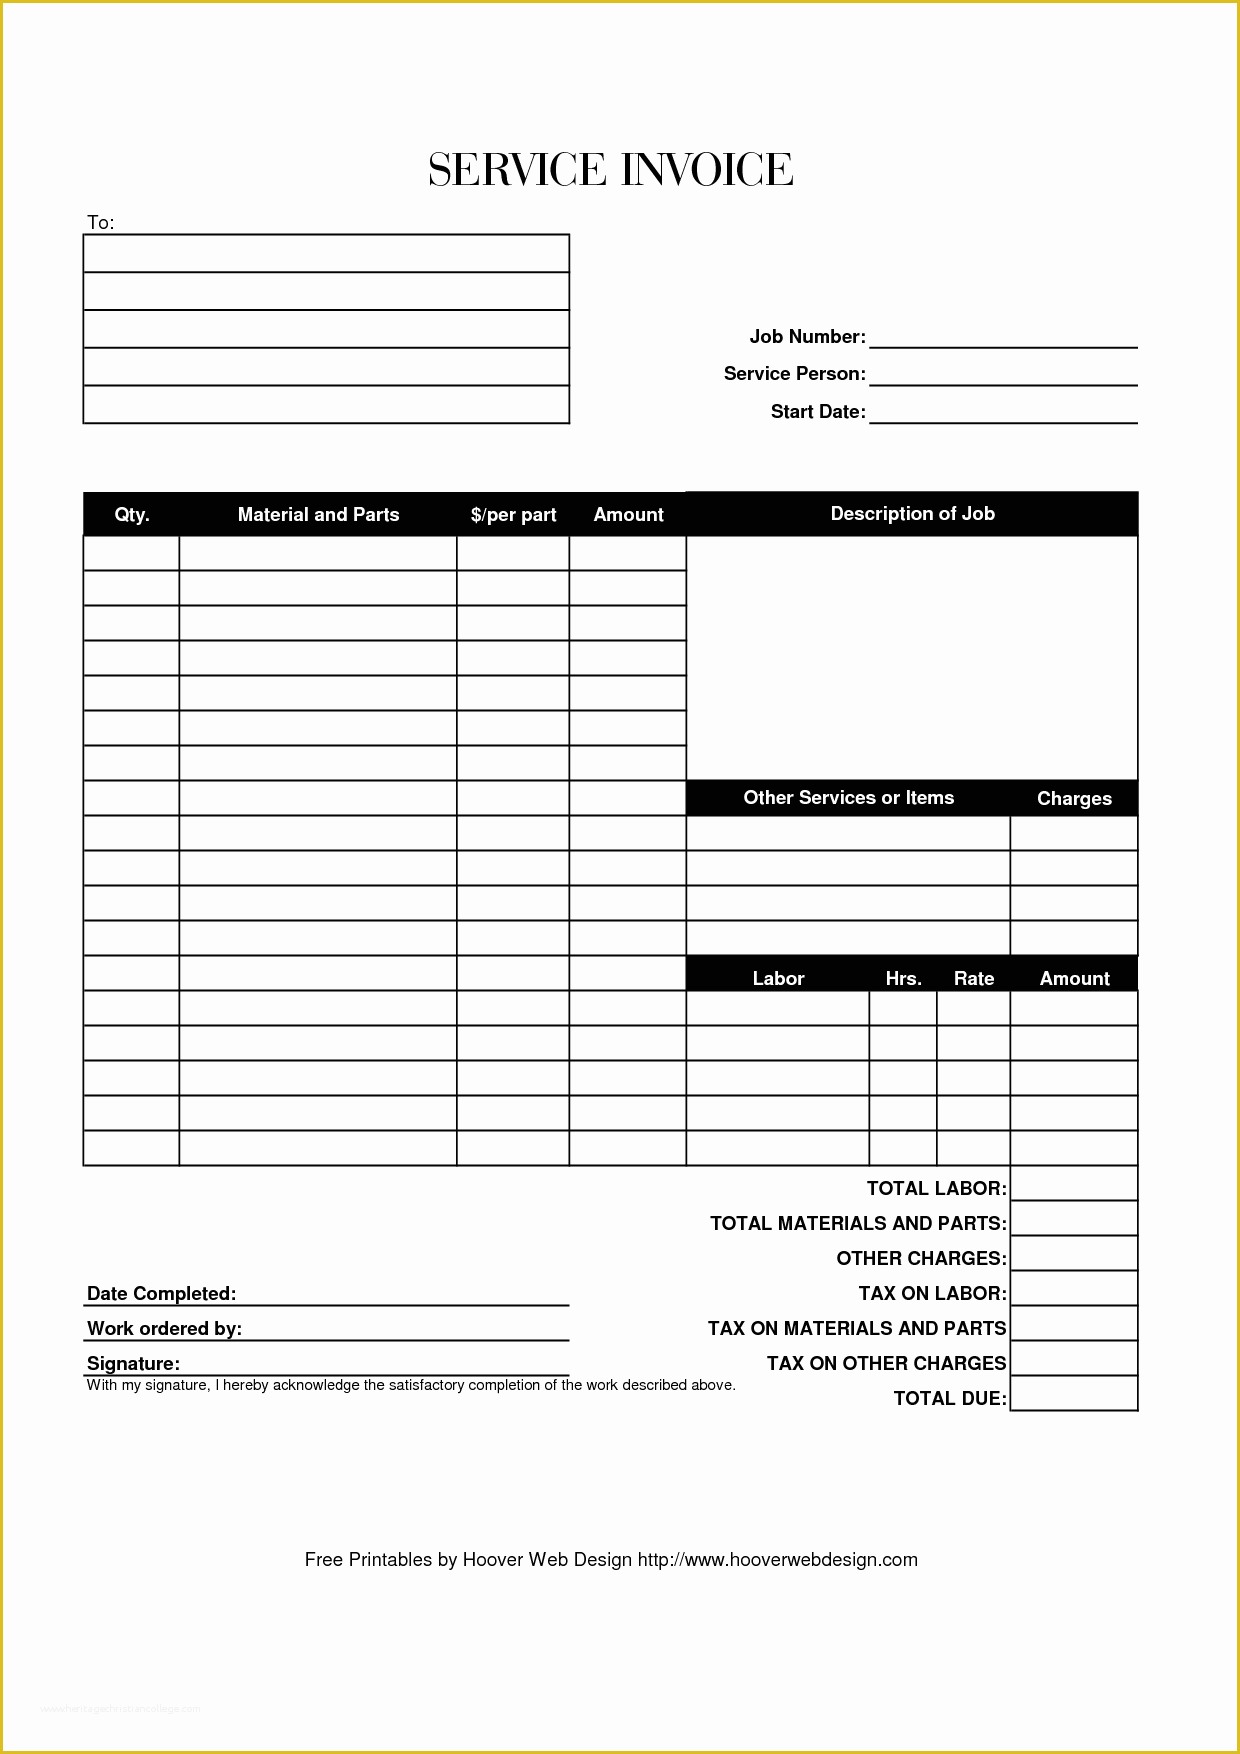 Service Invoice Template Free Of Hoover Receipts